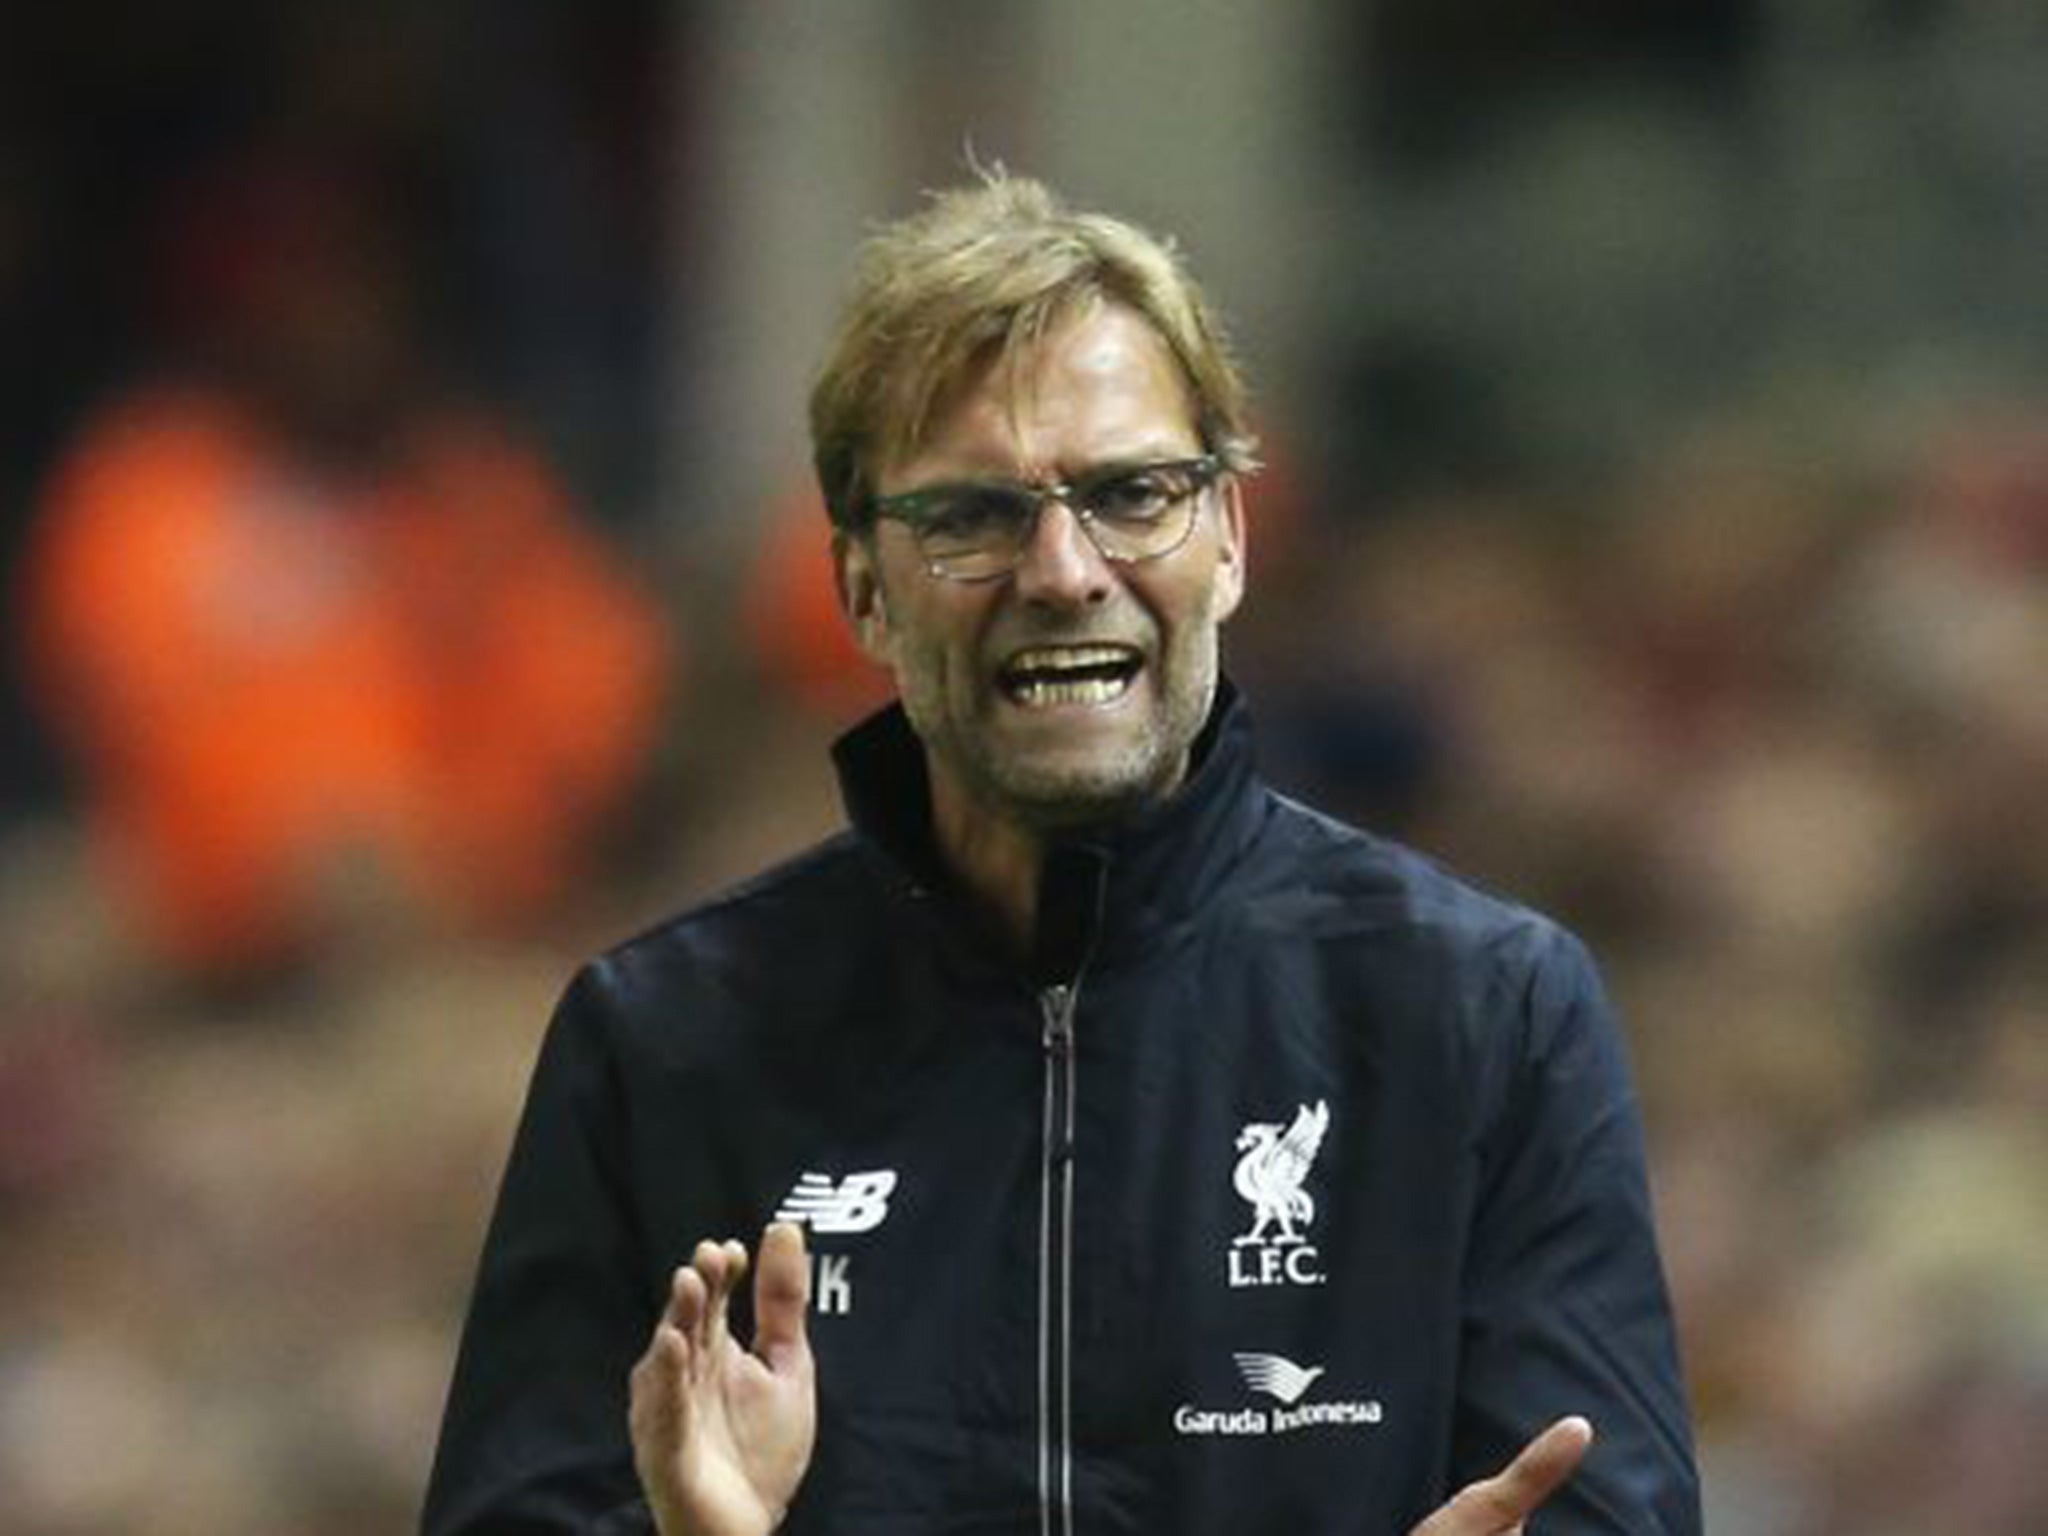 The Liverpool manager, Jürgen Klopp, has urged a more positive outlook in players and fans alike